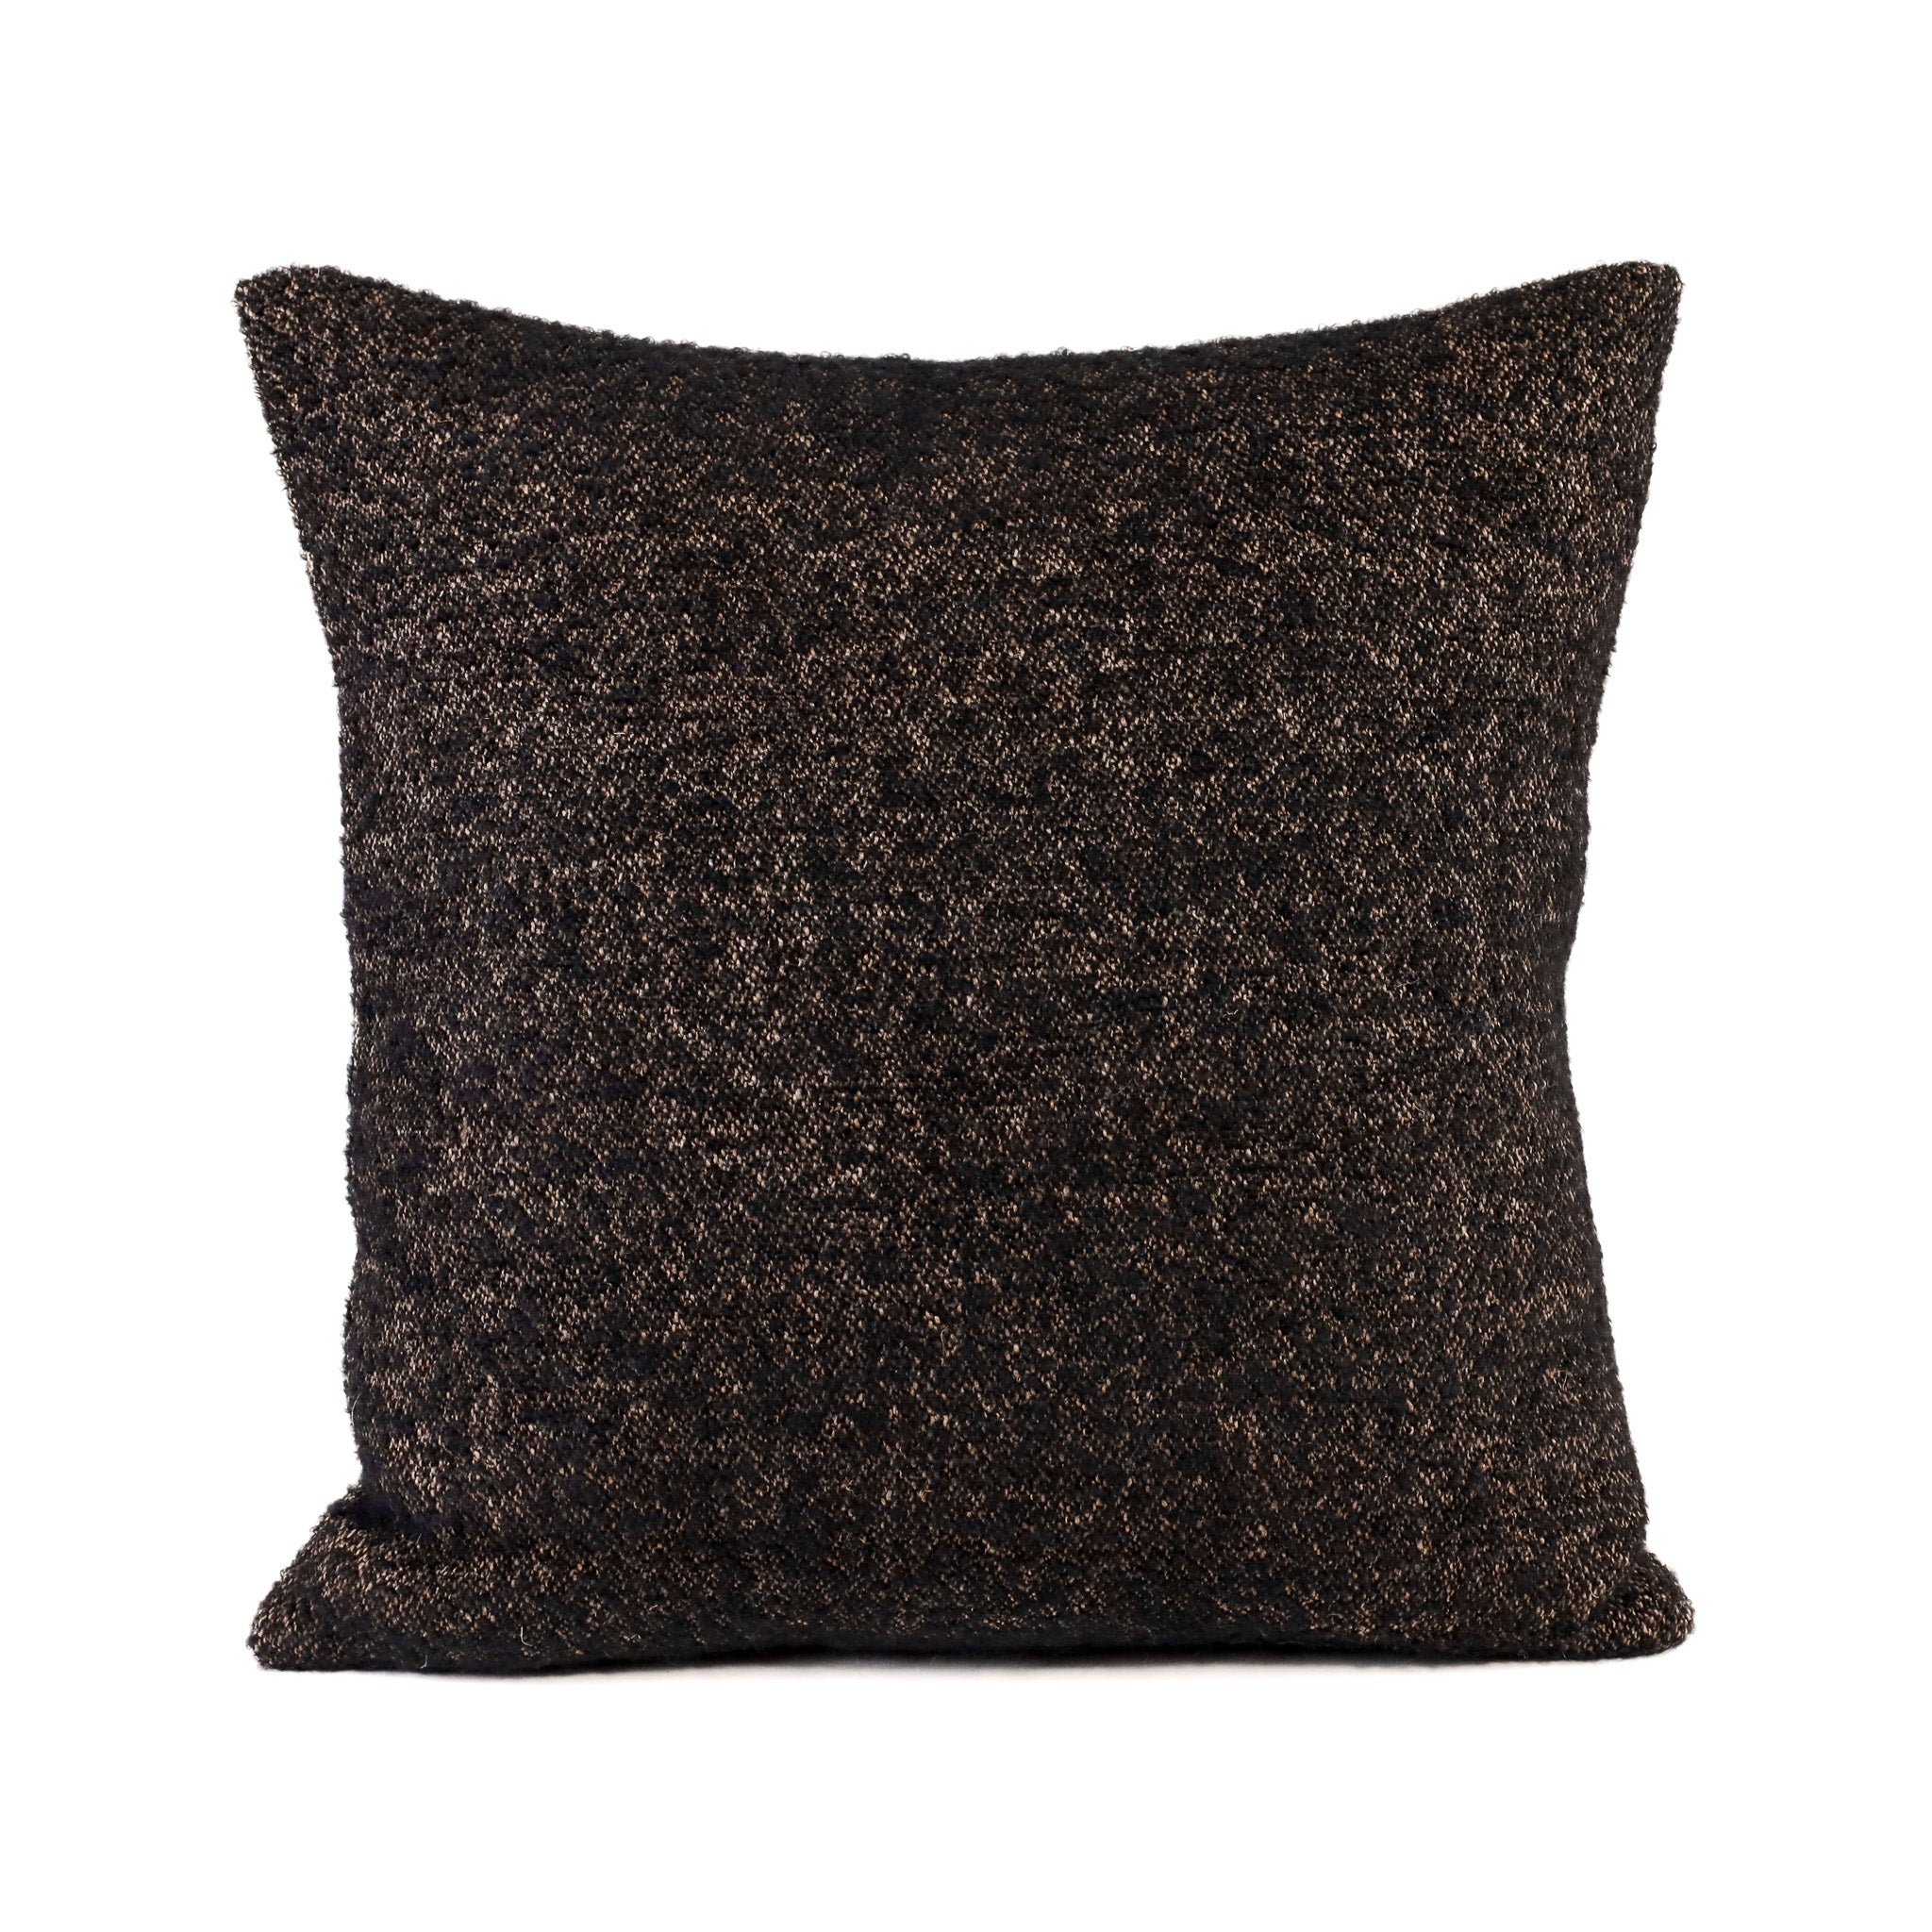 winters pillows by uniquity at adorn.house